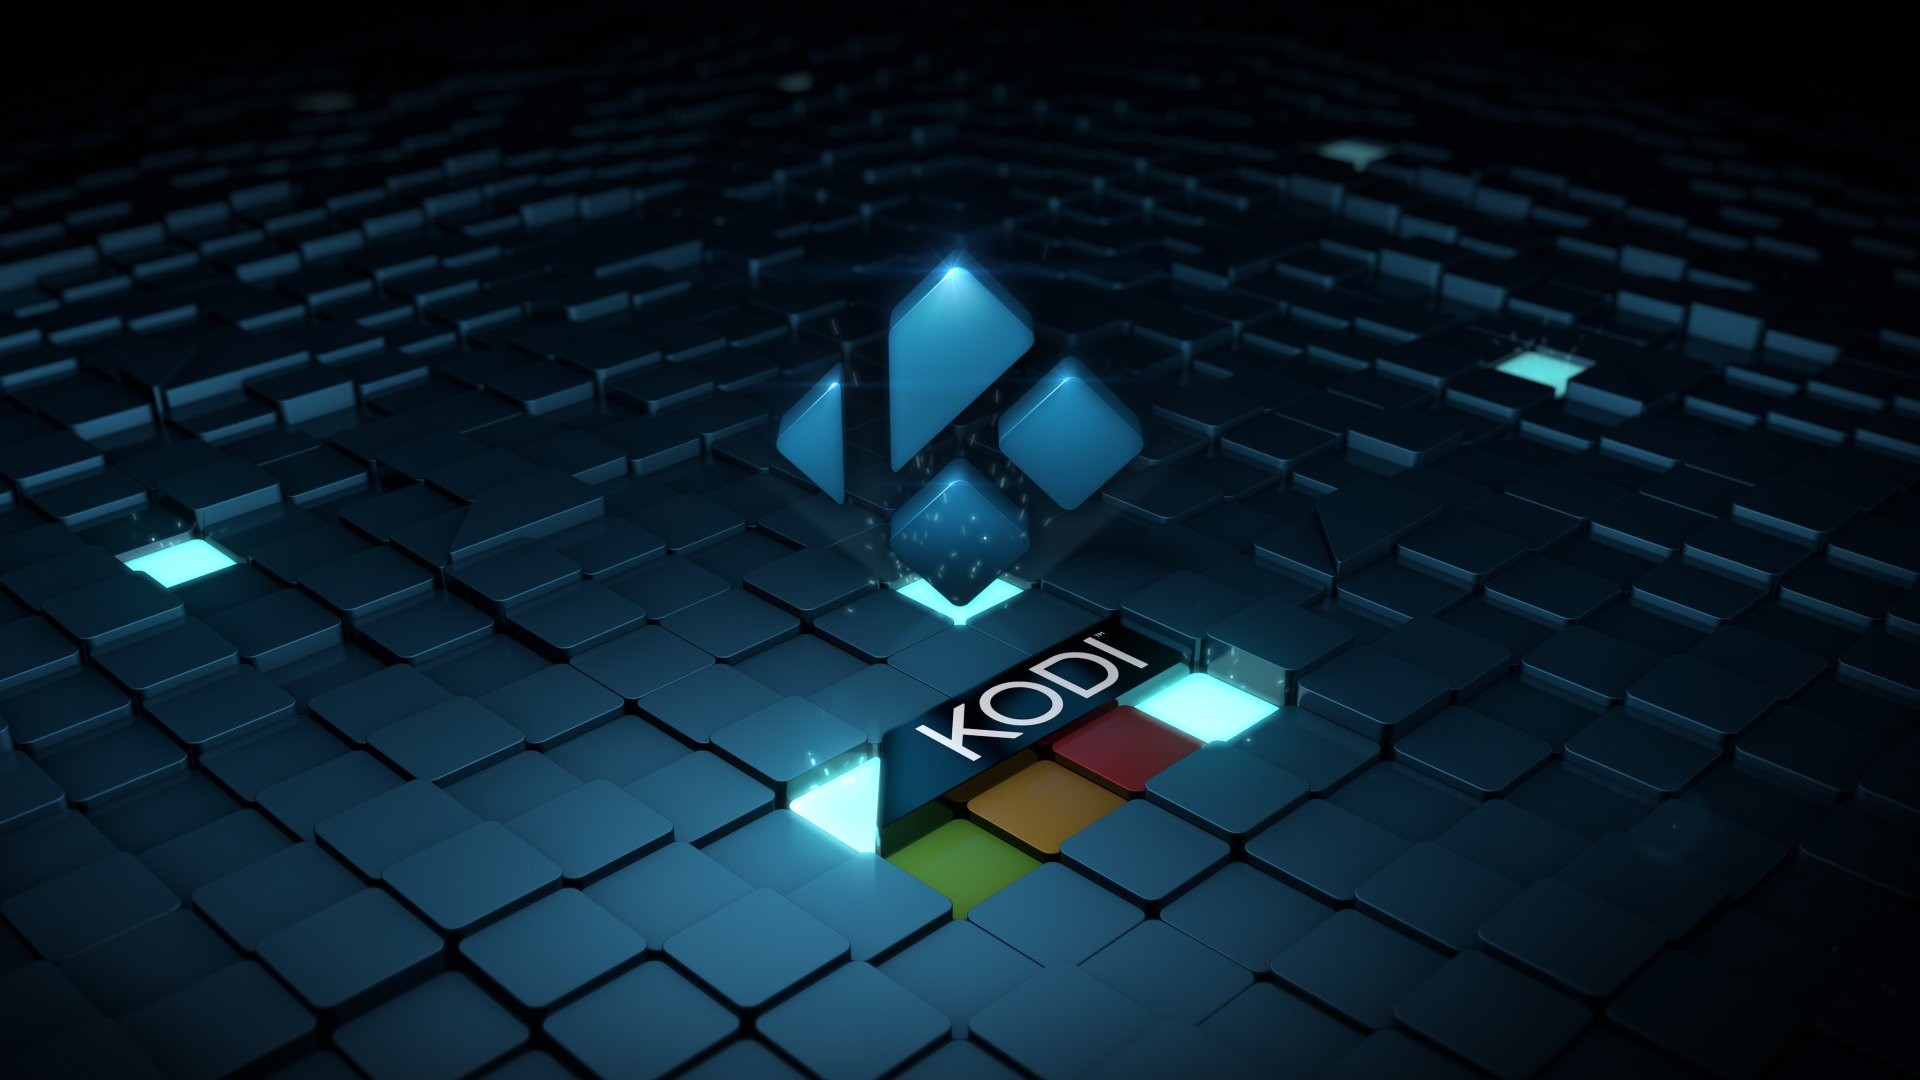 Kodi Background 1080p Wallpapers 84 Images